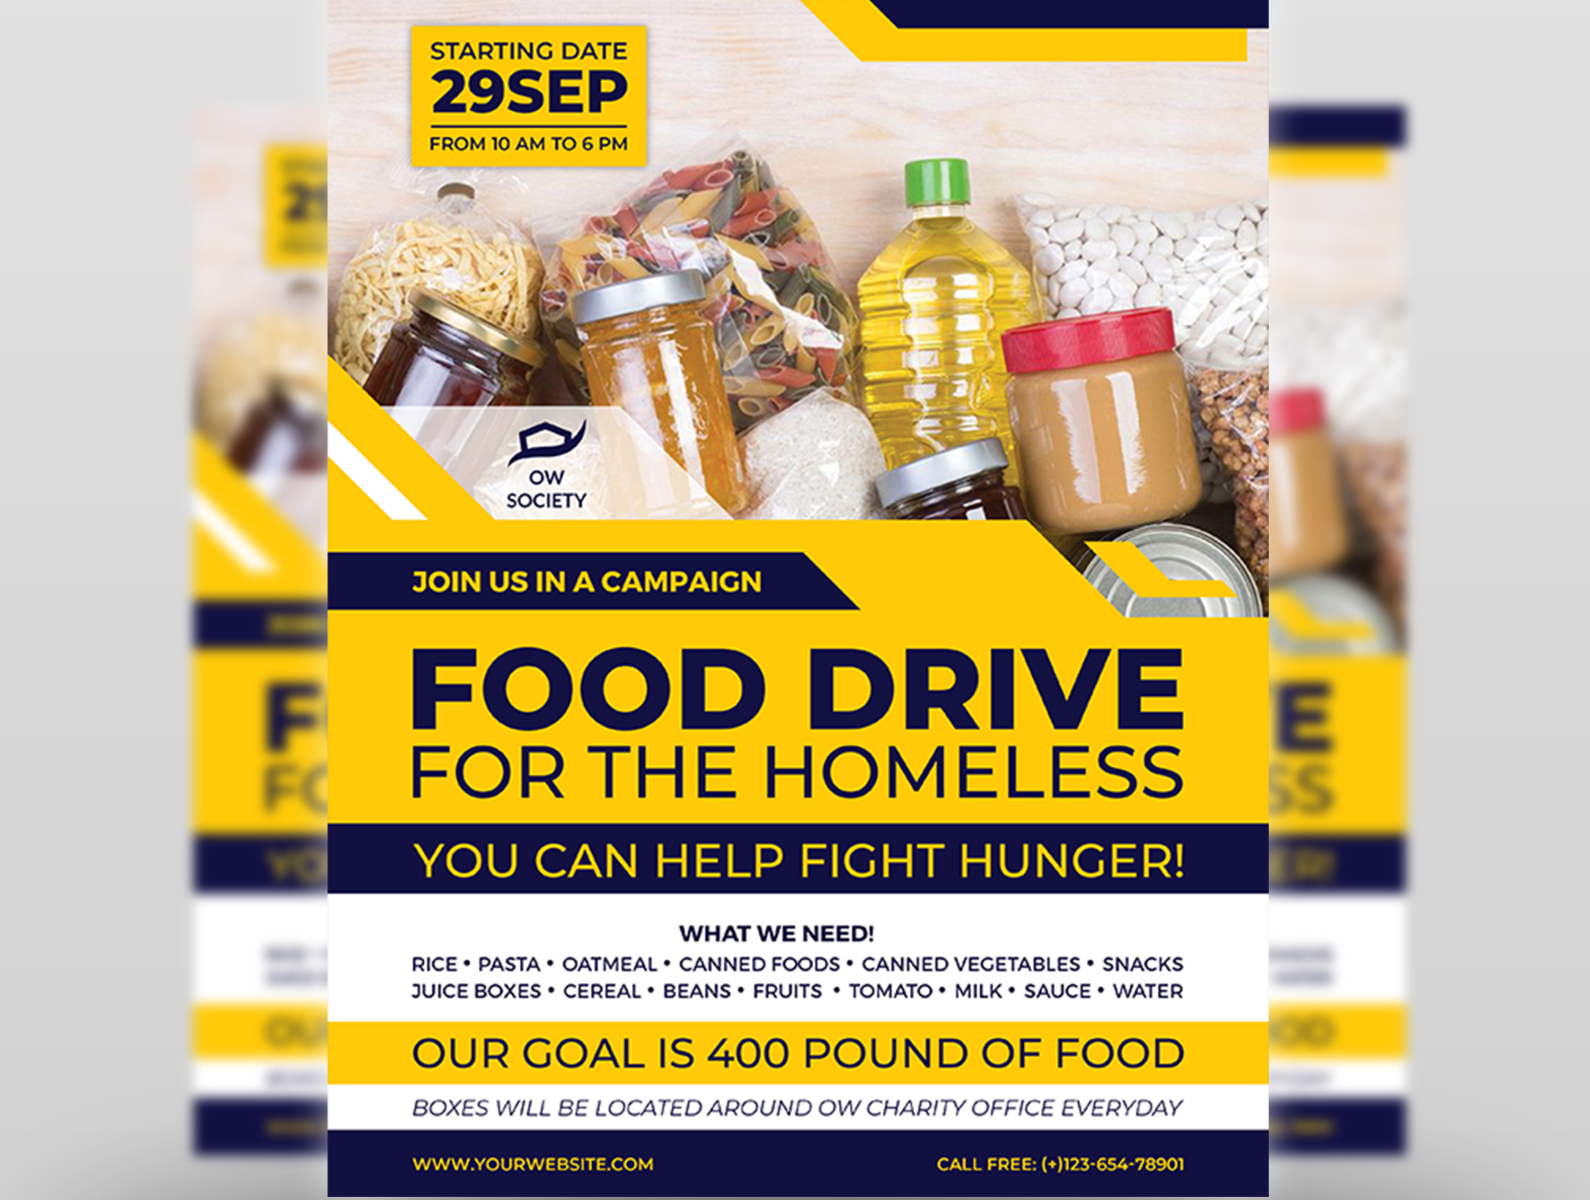 20 Homeless Food Drive Flyer Template by OWPictures on Dribbble Throughout Food Drive Flyer Template